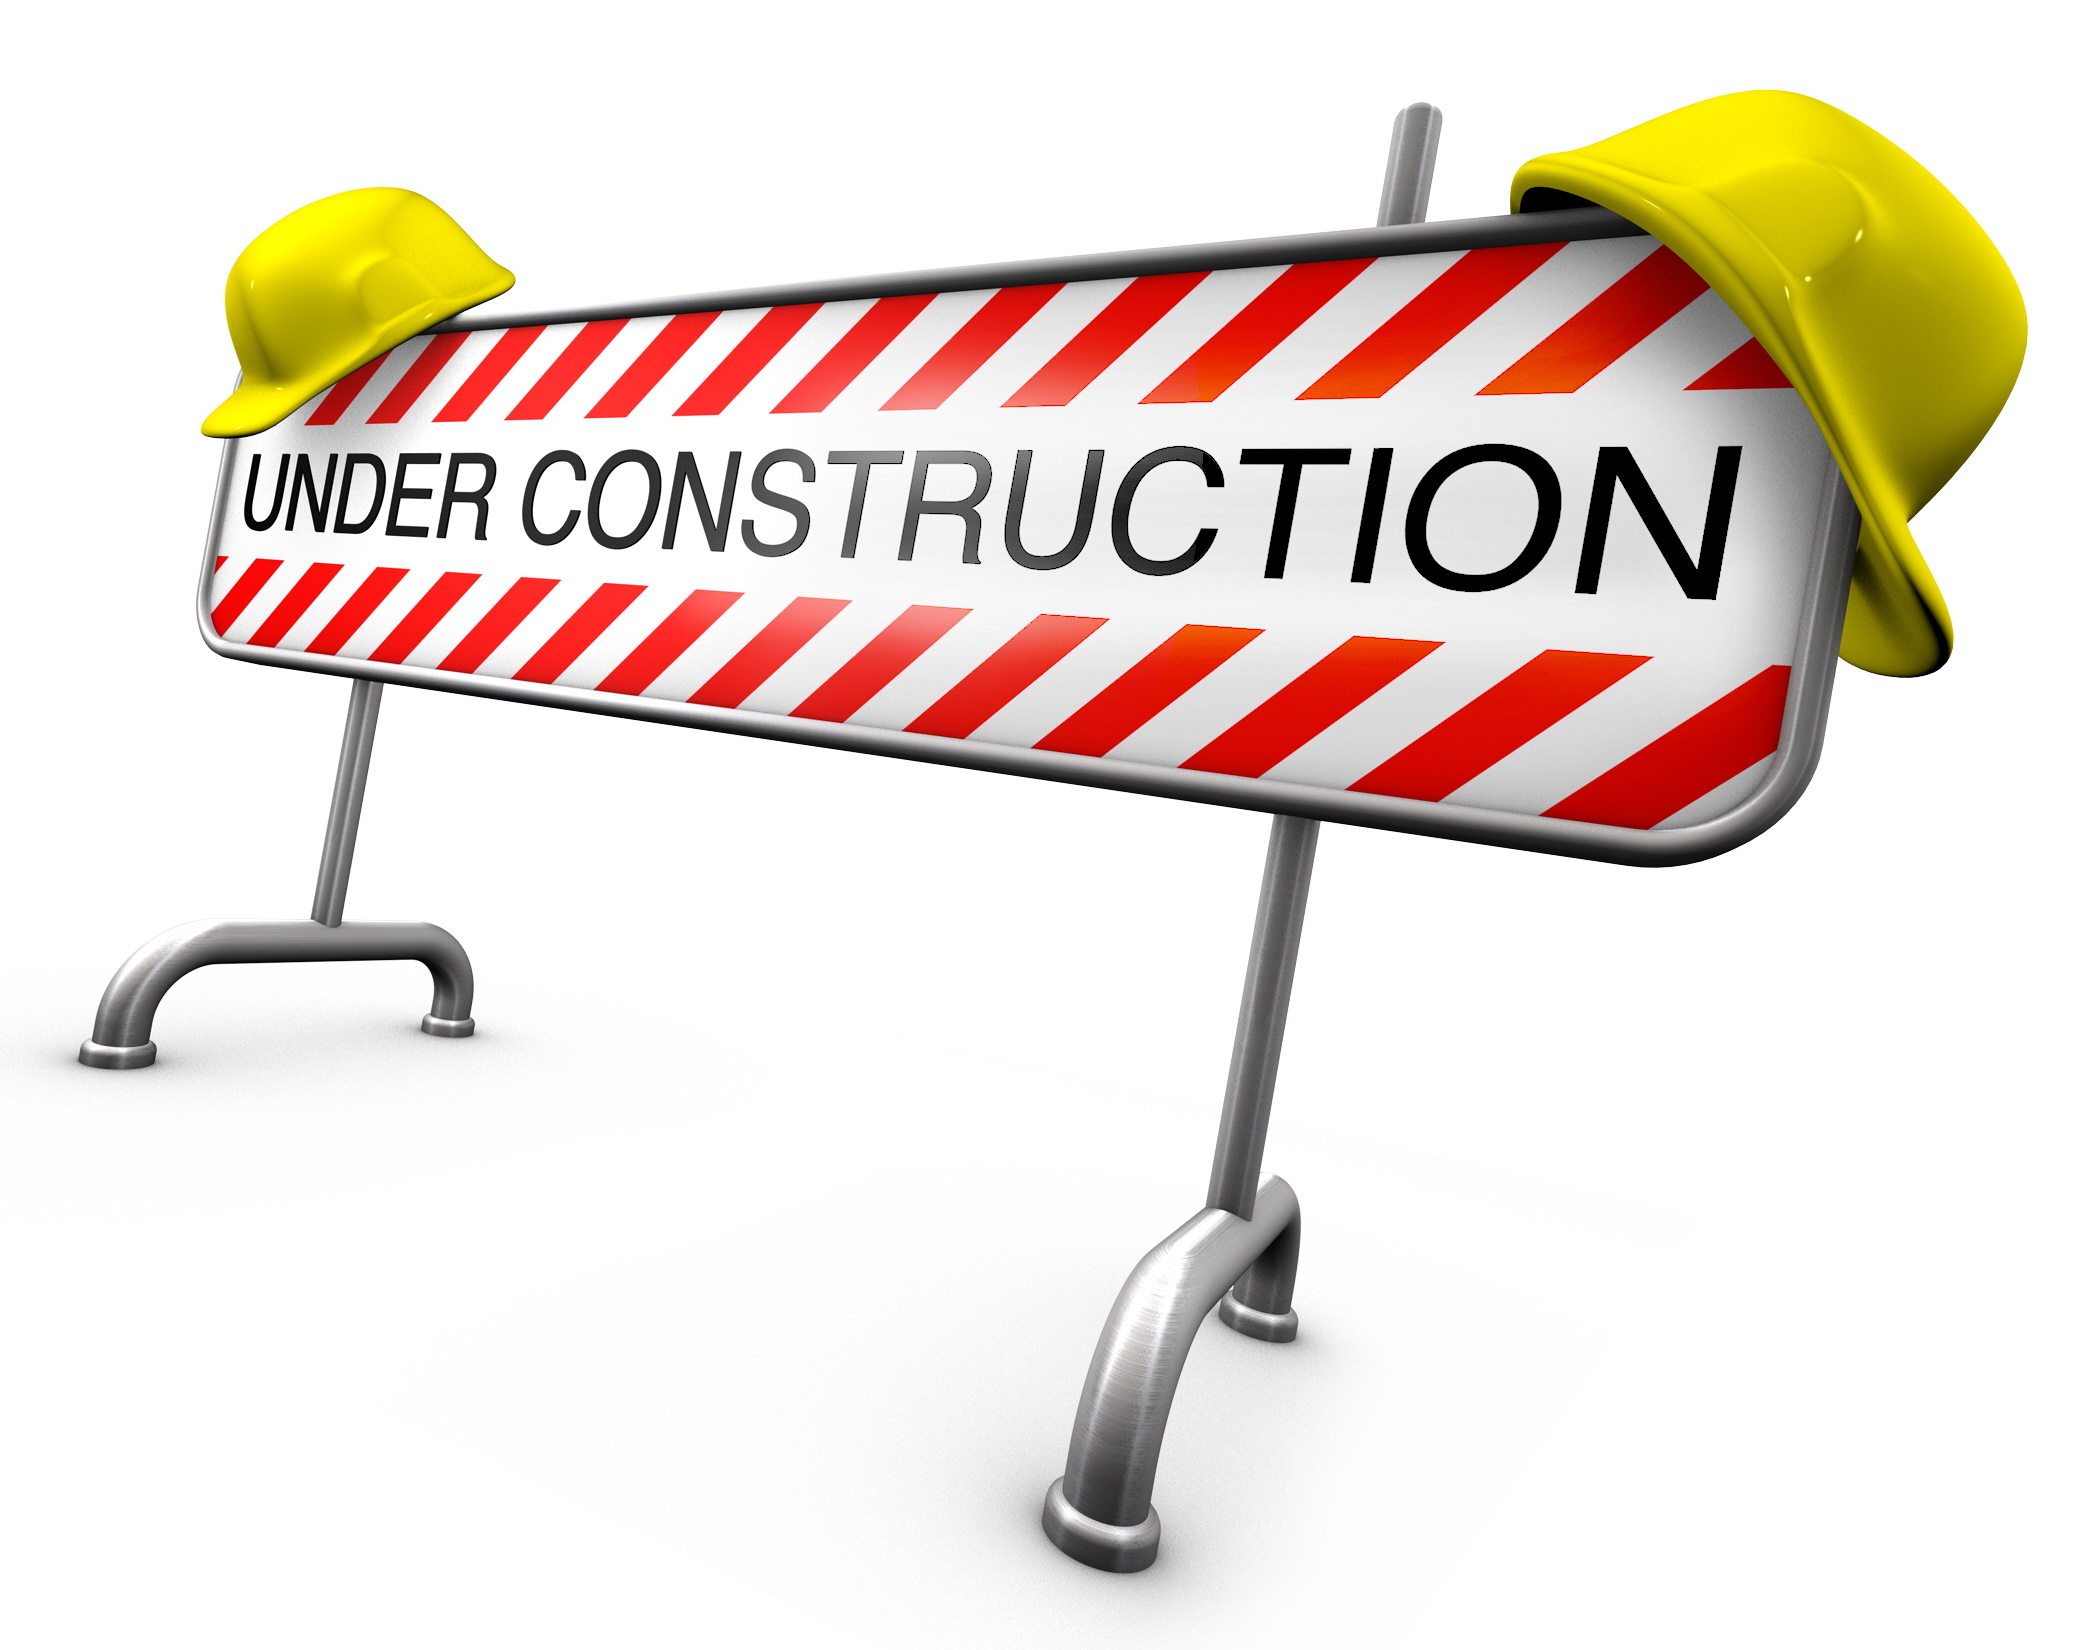 under construction clipart free download - photo #42